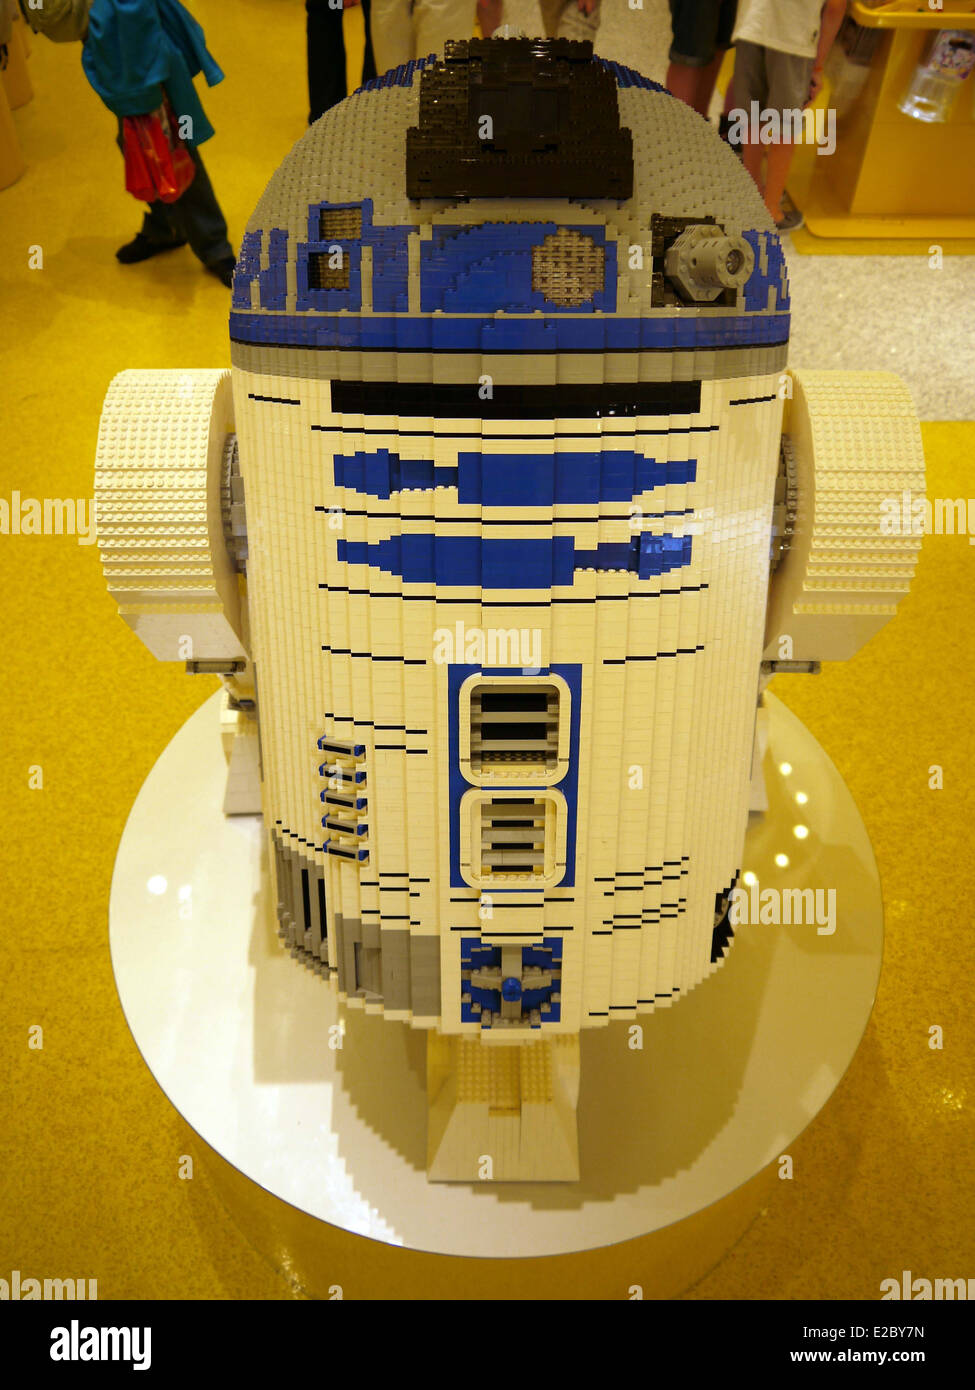 R2D2 Starwars figure made of Lego - This image was taken in the Lego Shop in Euro Disney Stock Photo